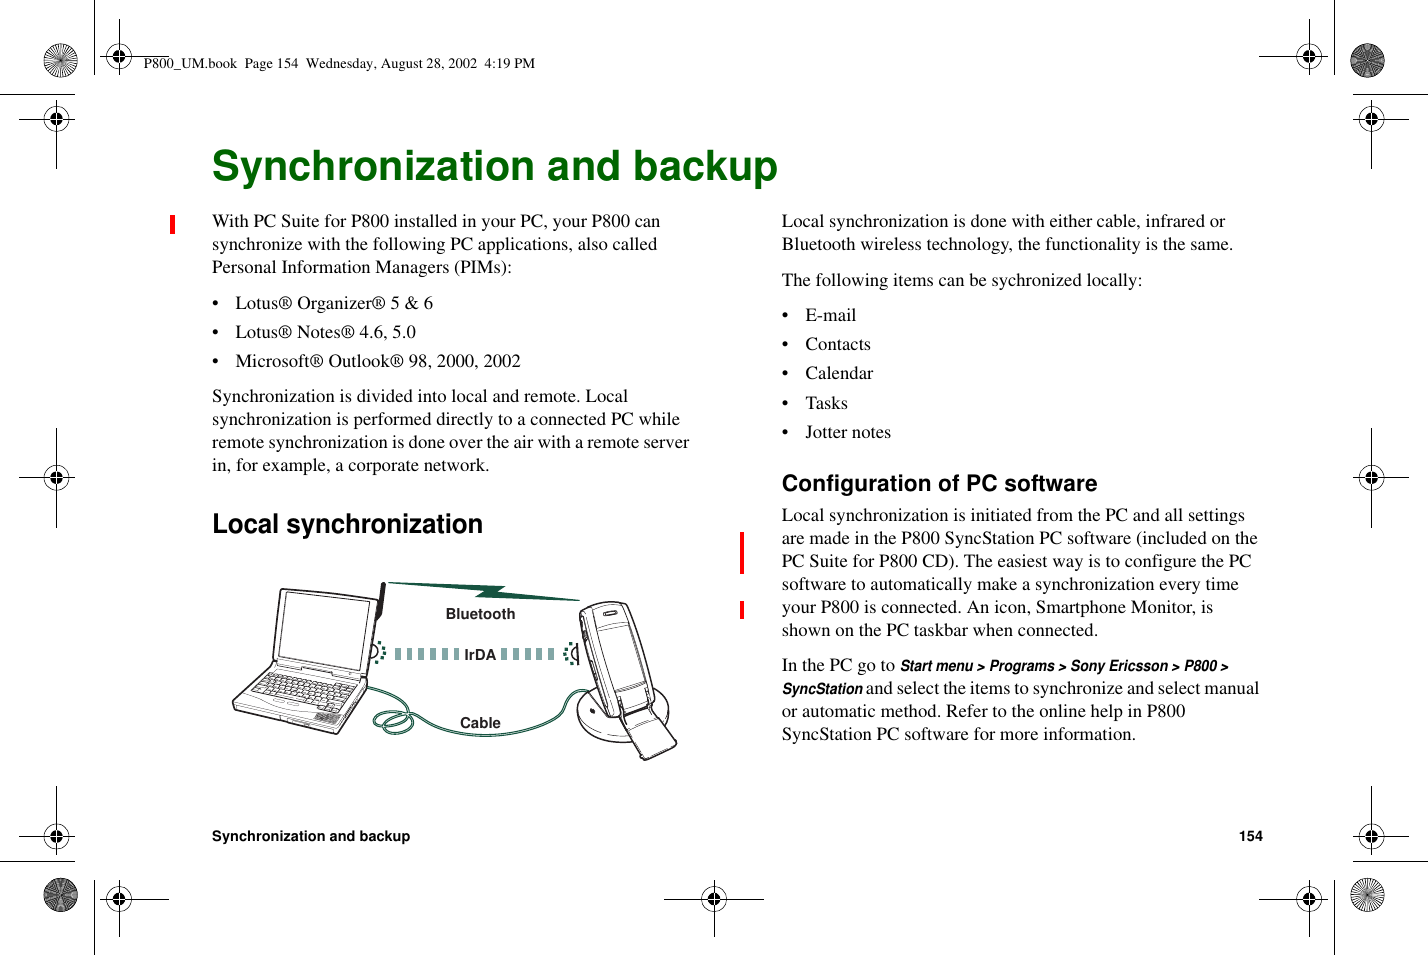 Synchronization and backup 154Synchronization and backupWith PC Suite for P800 installed in your PC, your P800 cansynchronize with the following PC applications, also calledPersonal Information Managers (PIMs):• Lotus® Organizer® 5 &amp; 6• Lotus® Notes® 4.6, 5.0• Microsoft® Outlook® 98, 2000, 2002Synchronization is divided into local and remote. Localsynchronization is performed directly to a connected PC whileremote synchronization is done over the air with a remote serverin, for example, a corporate network.Local synchronizationLocal synchronization is done with either cable, infrared orBluetooth wireless technology, the functionality is the same.The following items can be sychronized locally:•E-mail•Contacts• Calendar•Tasks• Jotter notesConfiguration of PC softwareLocal synchronization is initiated from the PC and all settingsare made in the P800 SyncStation PC software (included on thePC Suite for P800 CD). The easiest way is to configure the PCsoftware to automatically make a synchronization every timeyour P800 is connected. An icon, Smartphone Monitor, isshown on the PC taskbar when connected.In the PC go toStart menu &gt; Programs &gt; Sony Ericsson &gt; P800 &gt;SyncStationand select the items to synchronize and select manualor automatic method. Refer to the online help in P800SyncStation PC software for more information.BluetoothCableIrDAP800_UM.book Page 154 Wednesday, August 28, 2002 4:19 PM